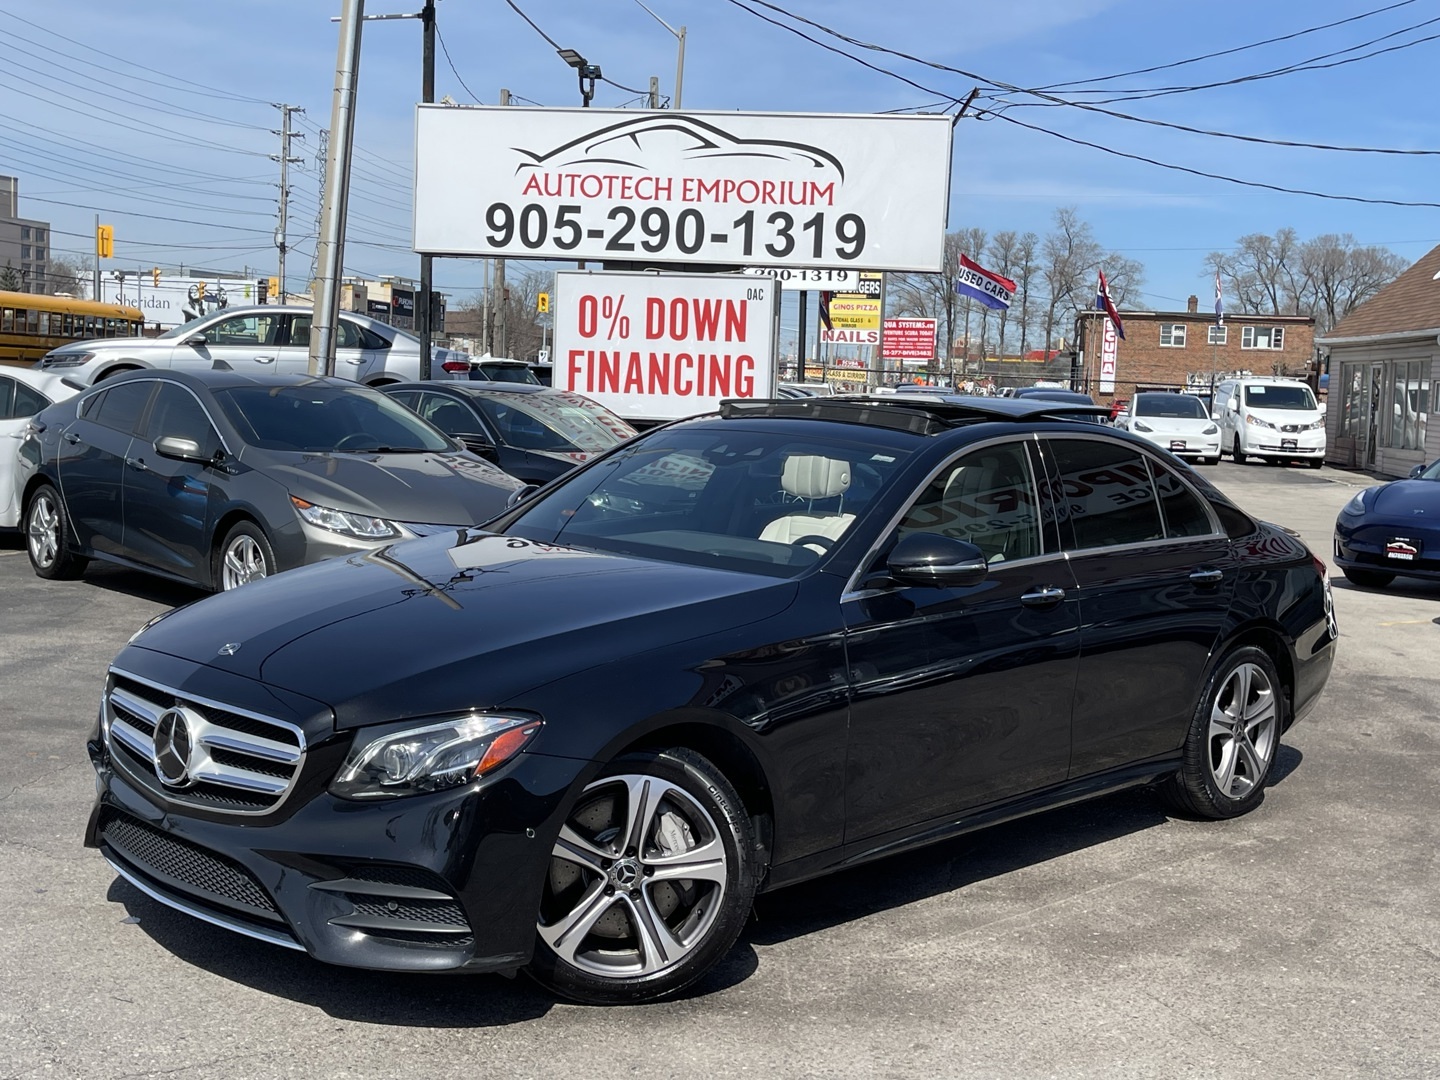 2018 Mercedes-Benz E-Class E400 4MATIC / PANO ROOF / LEATHER / NAVI / AMBIENT